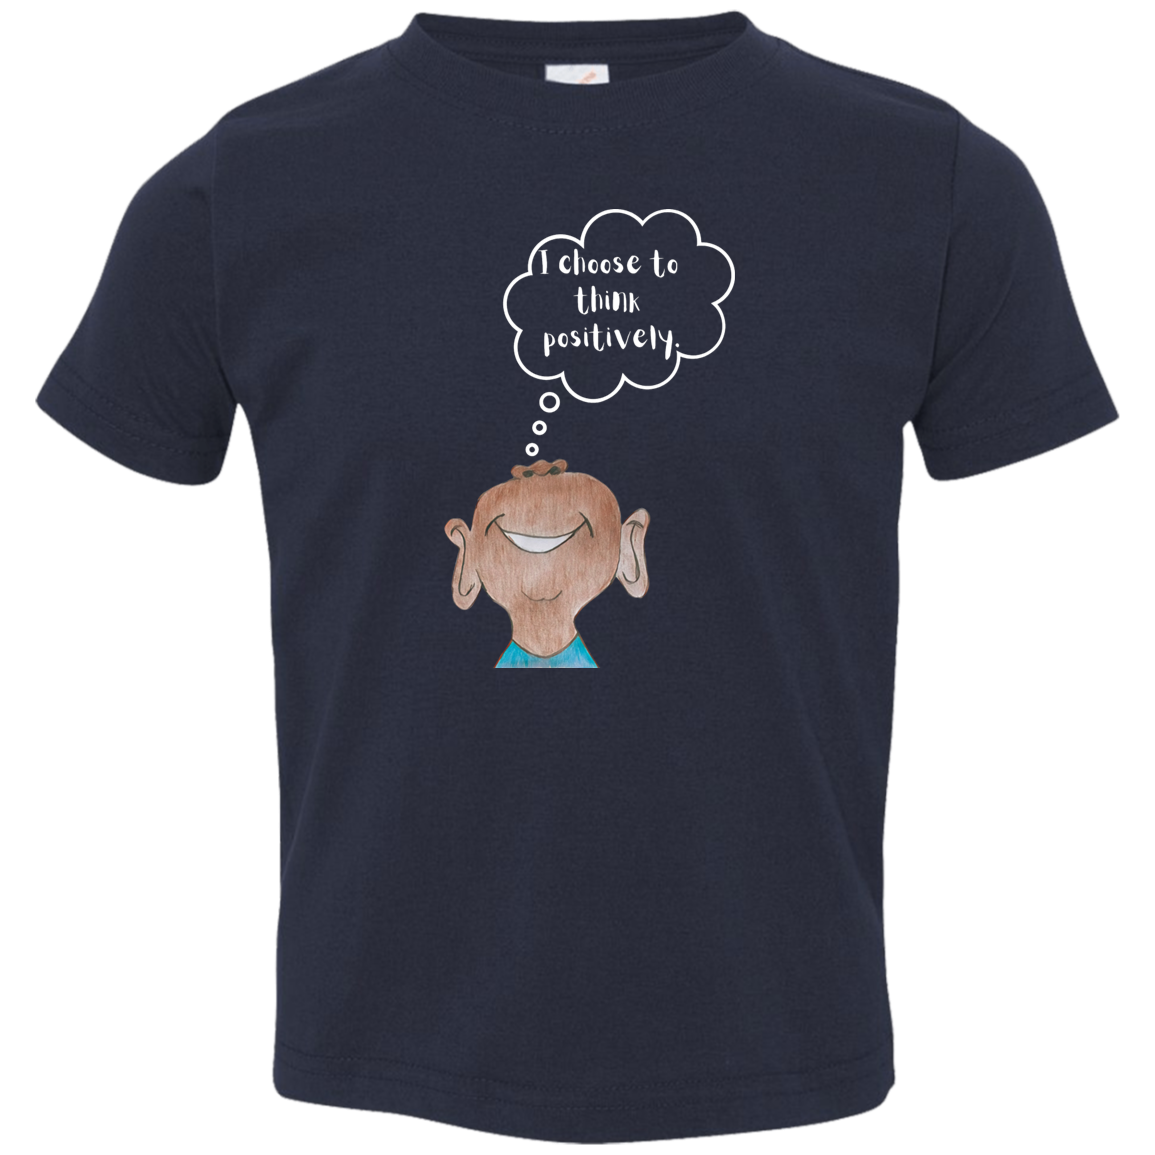 I choose to think positively. Toddler Jersey T-Shirt